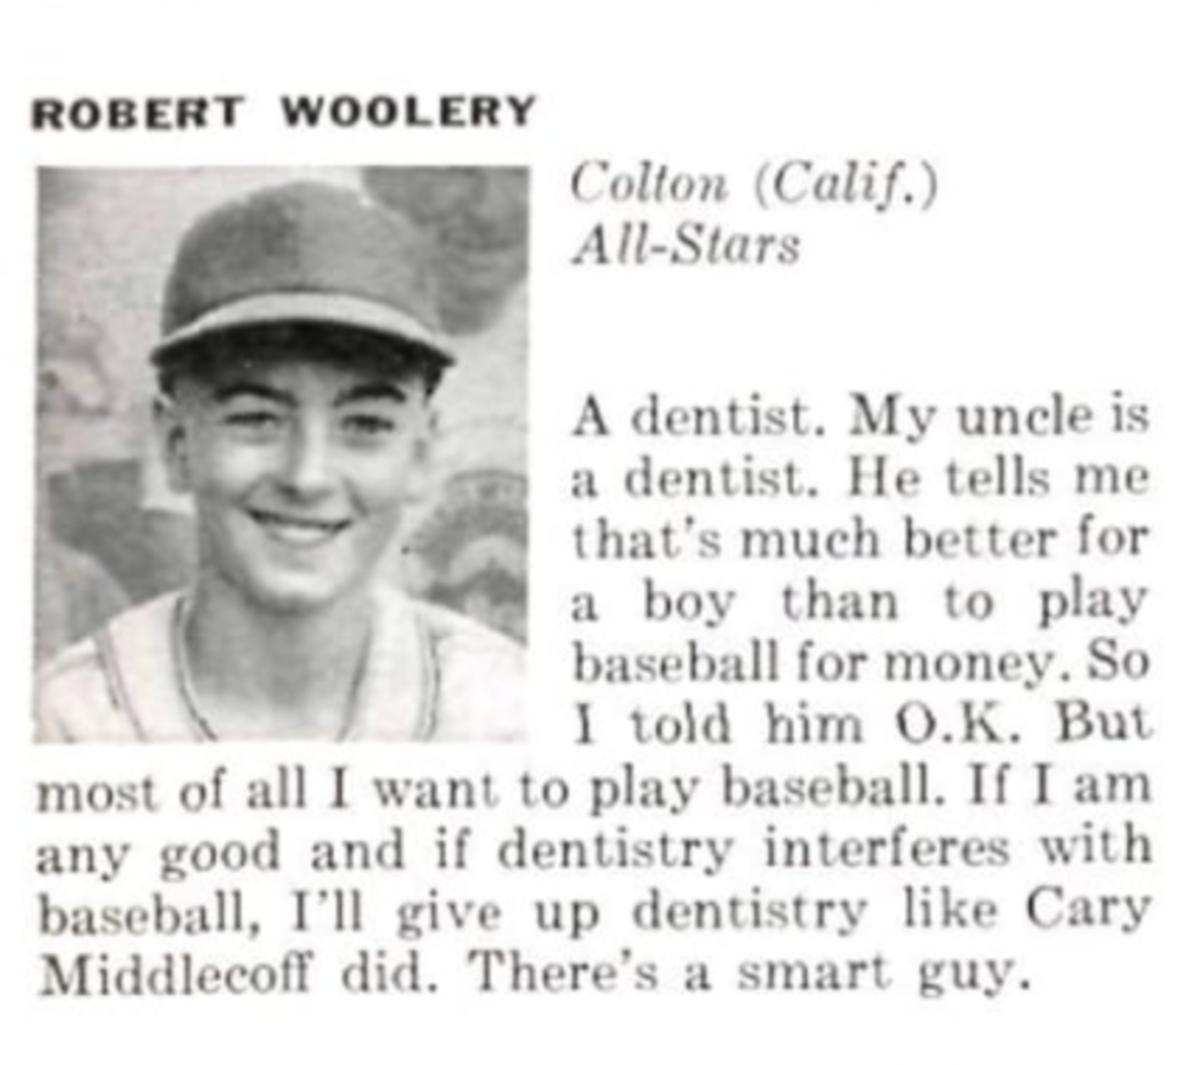 Robert Woolery, who played in the 1956 Little League World Series, told SI that his highest ambition was to be a dentist.